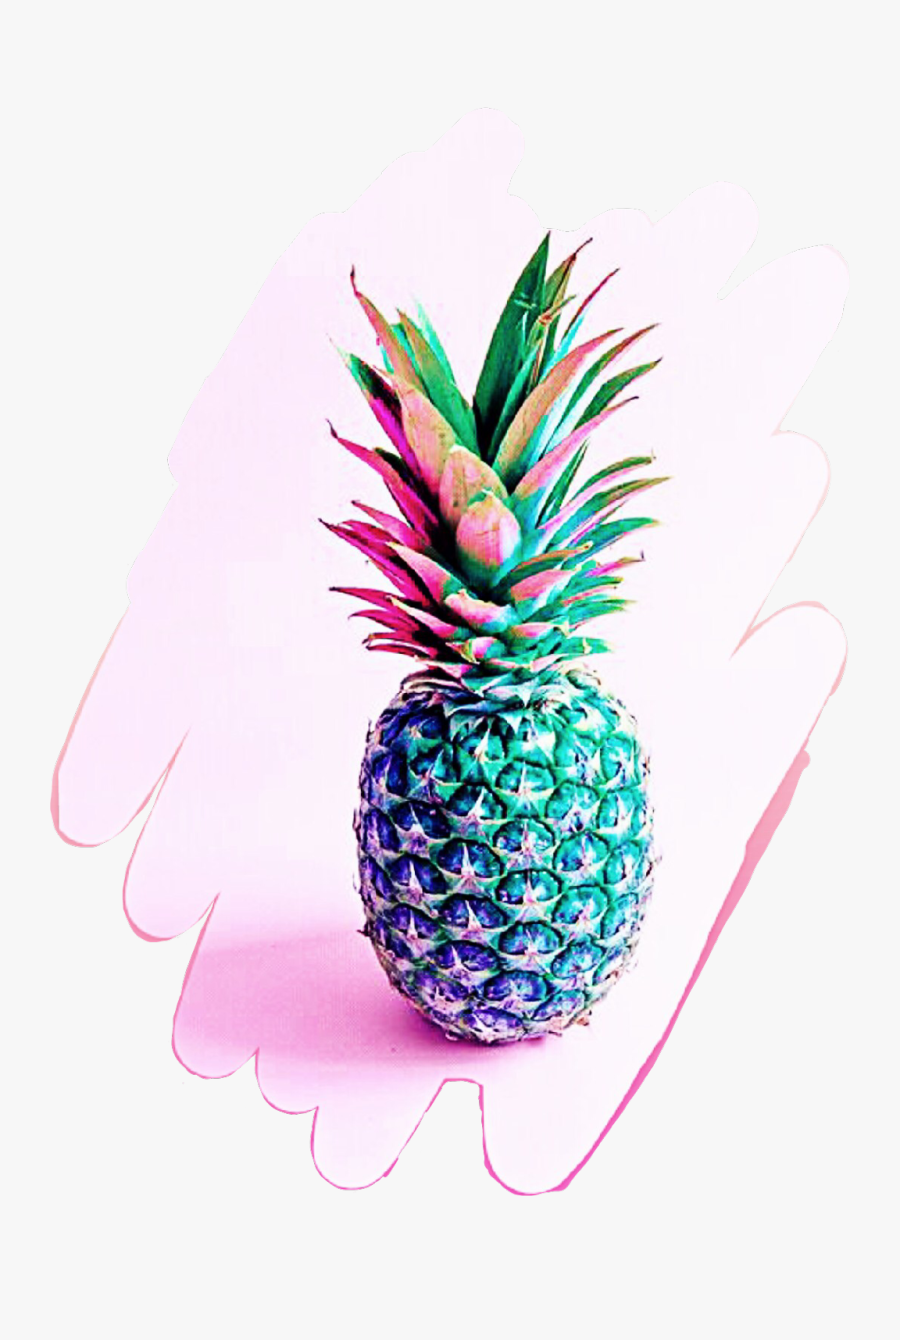 Pineapple Clipart Rainbow - Pineapple With Teal Background, Transparent Clipart